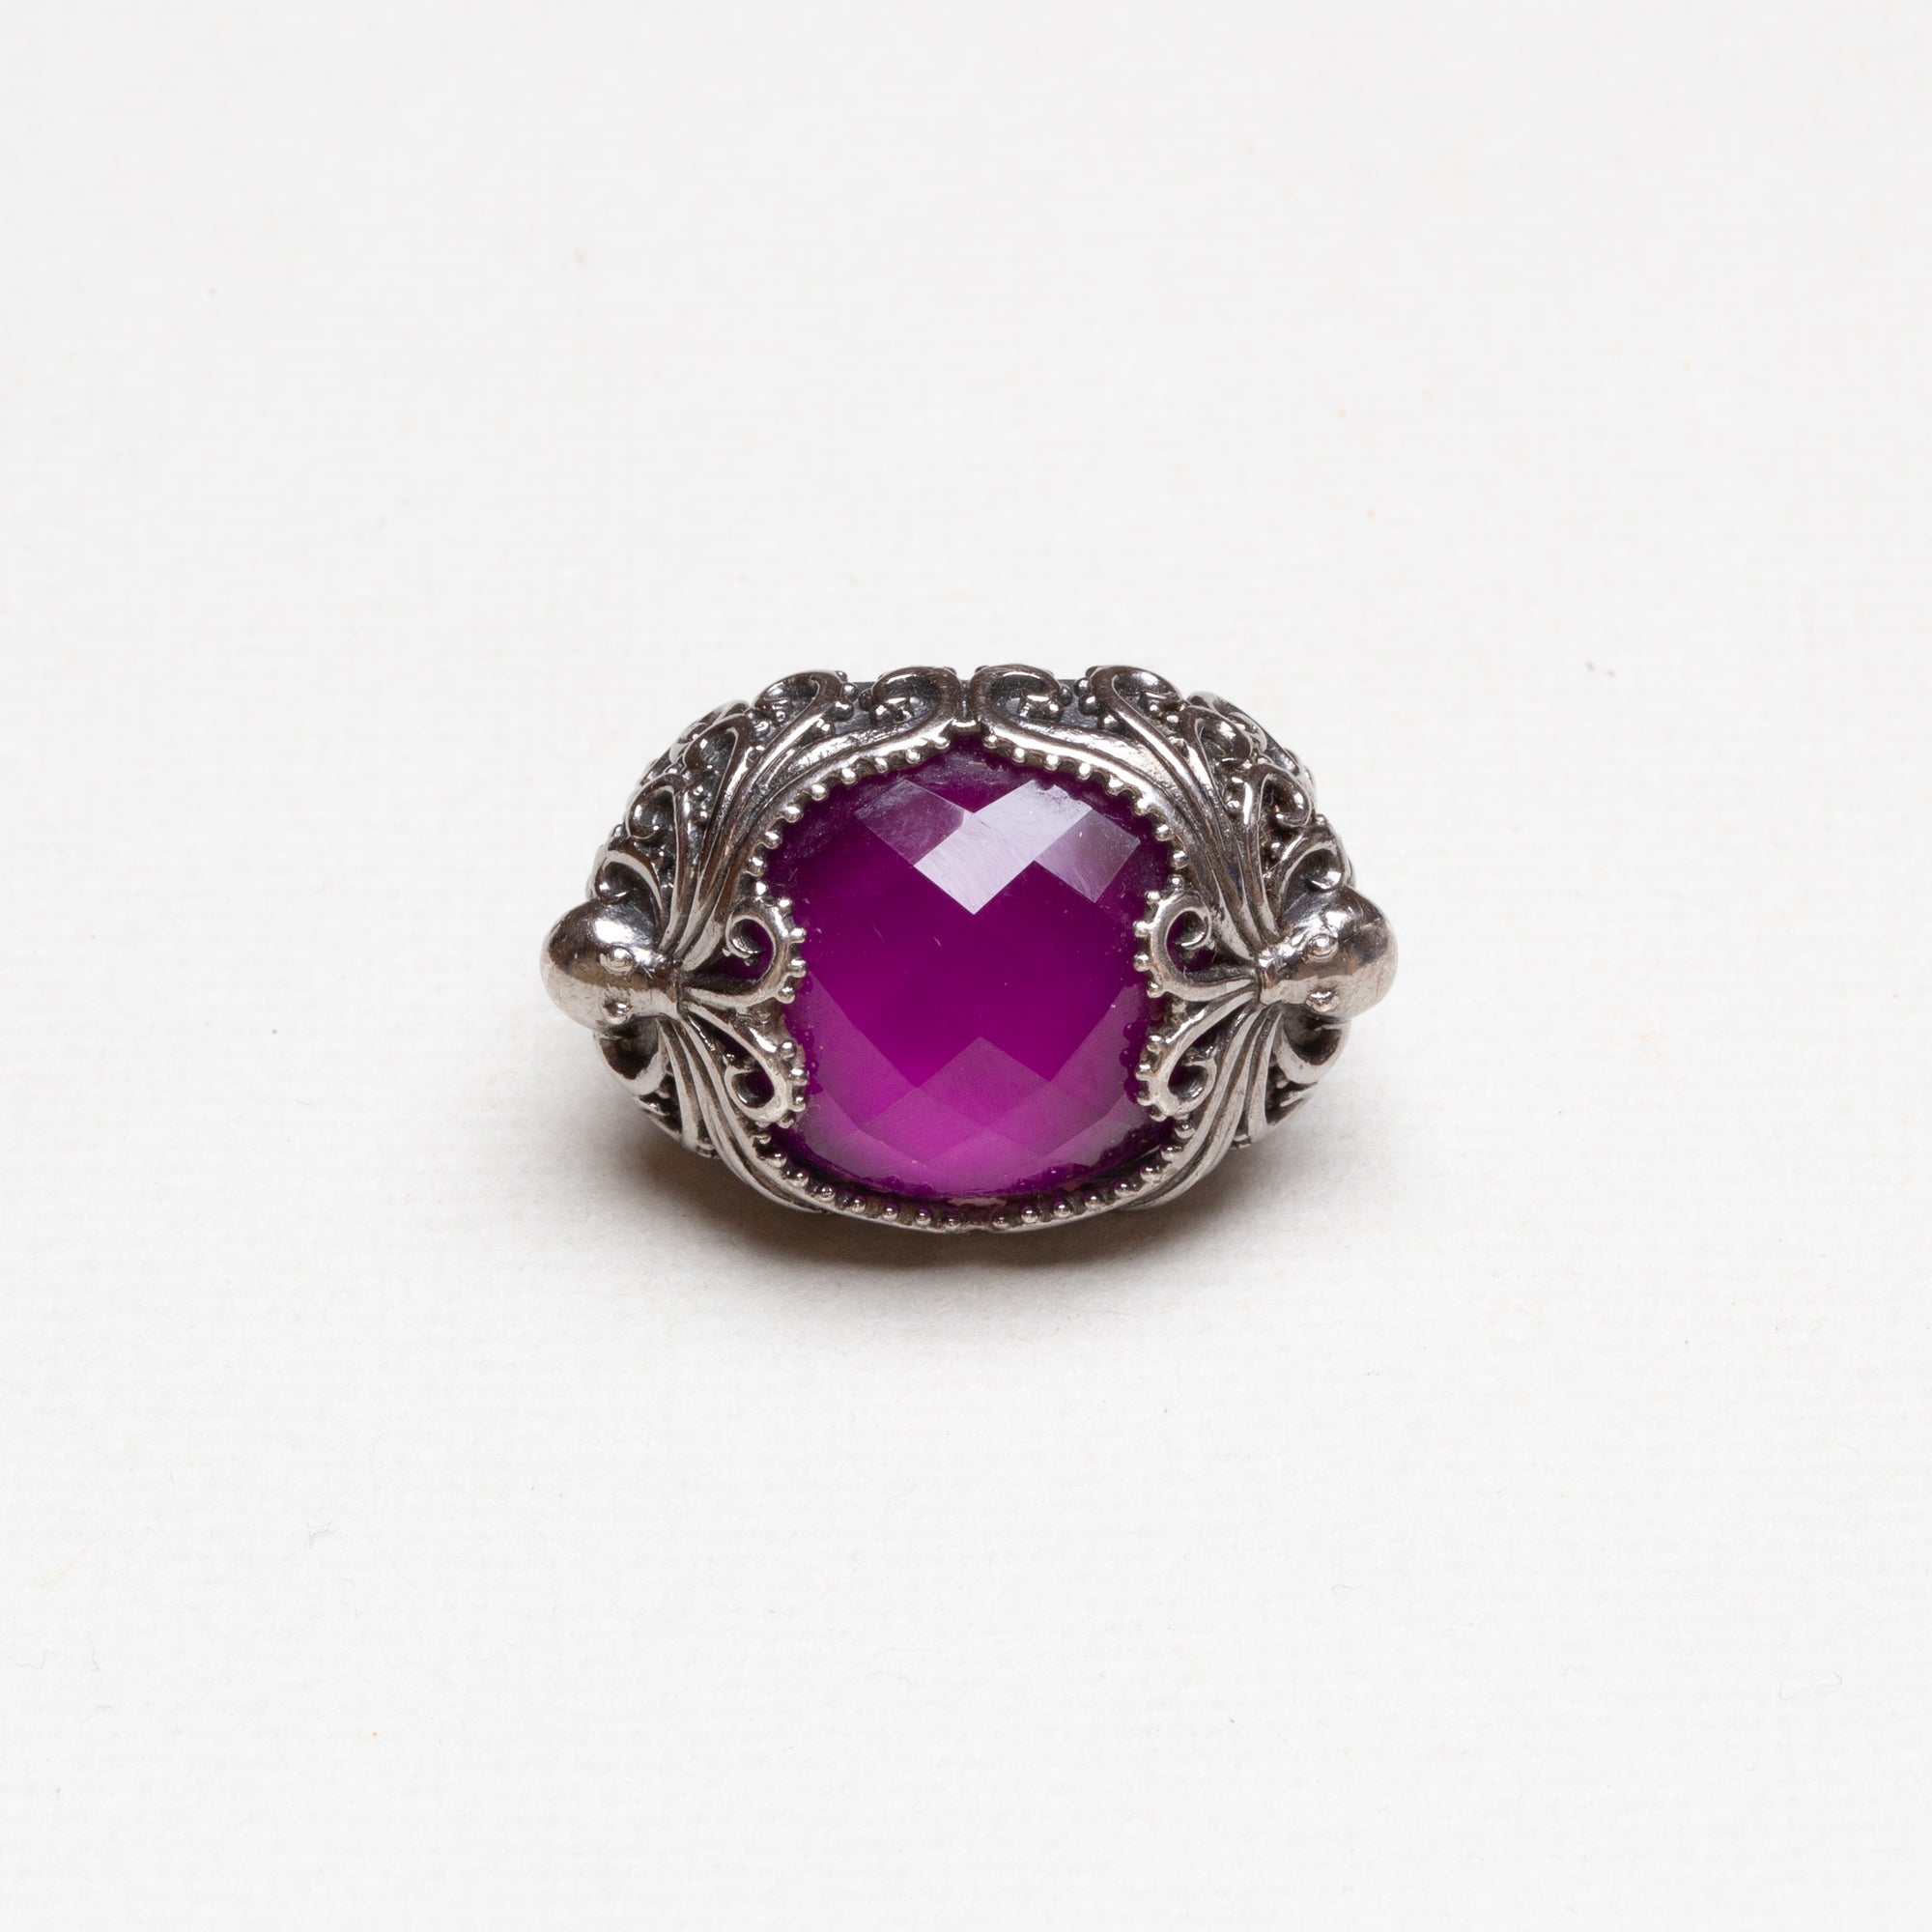 Vintage Sterling Silver Square Ring with Purple Quartz